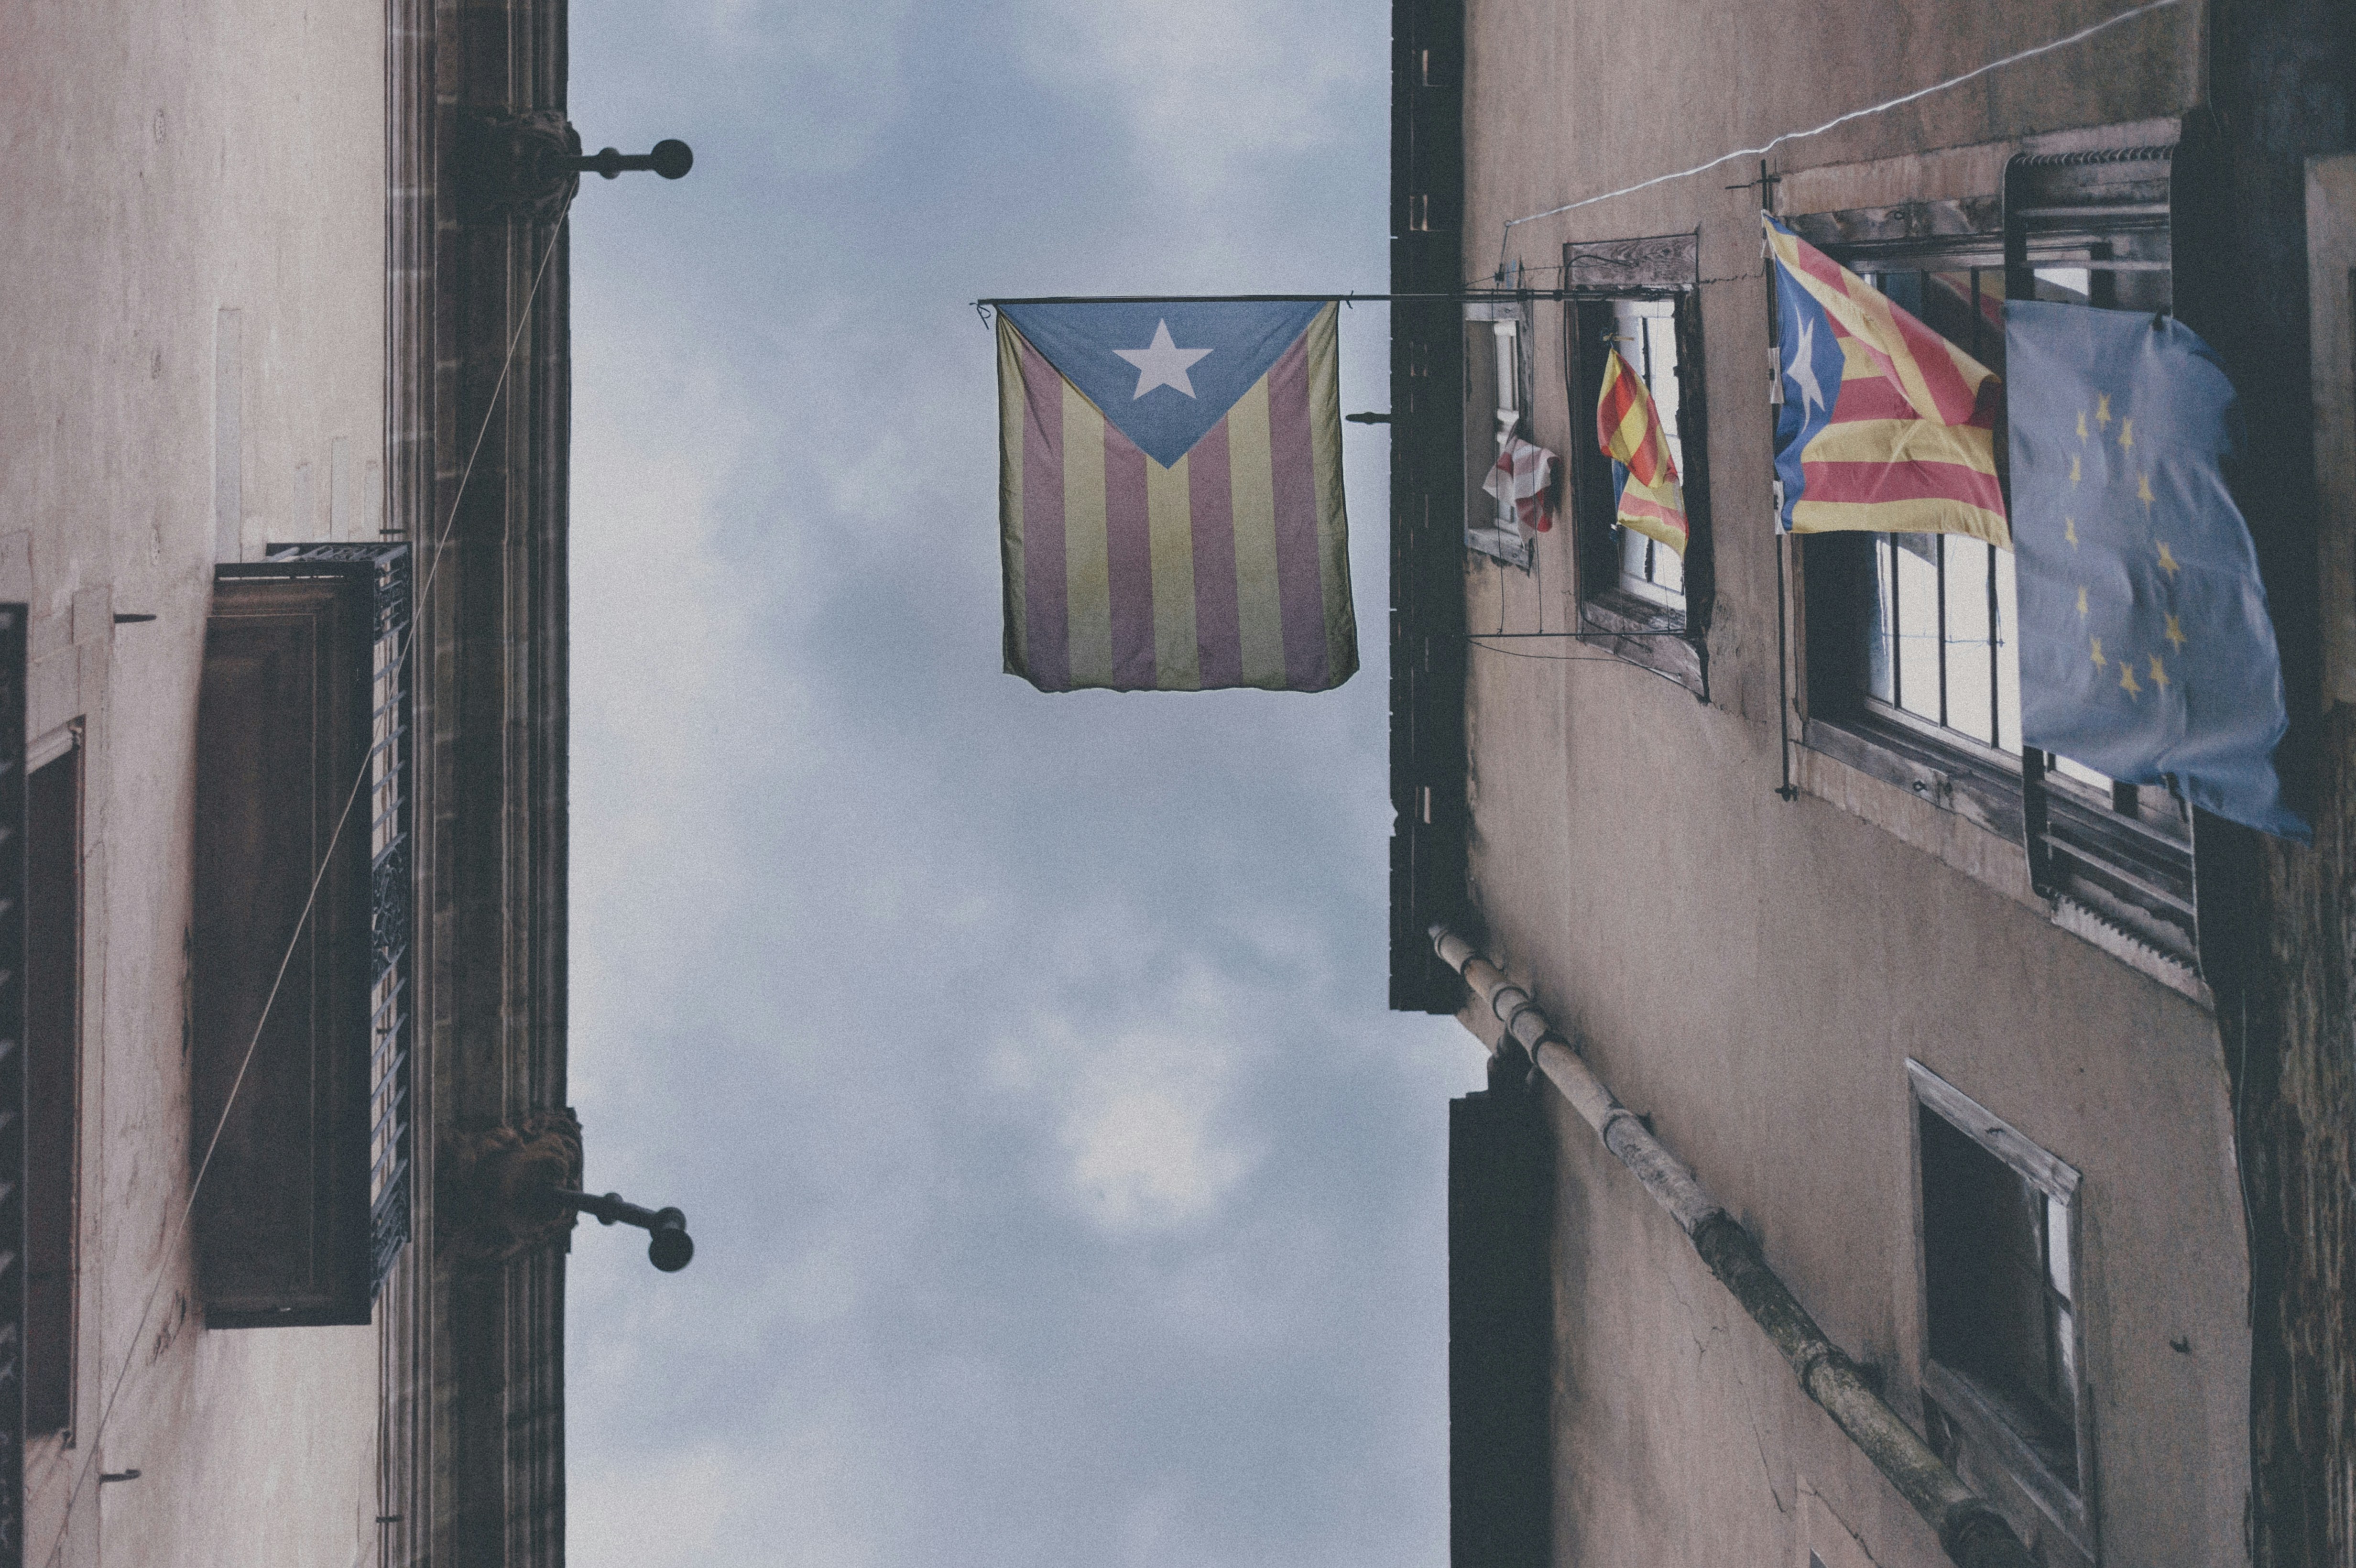 Flags of Catalonia and the European Union on the street of Barcelona.